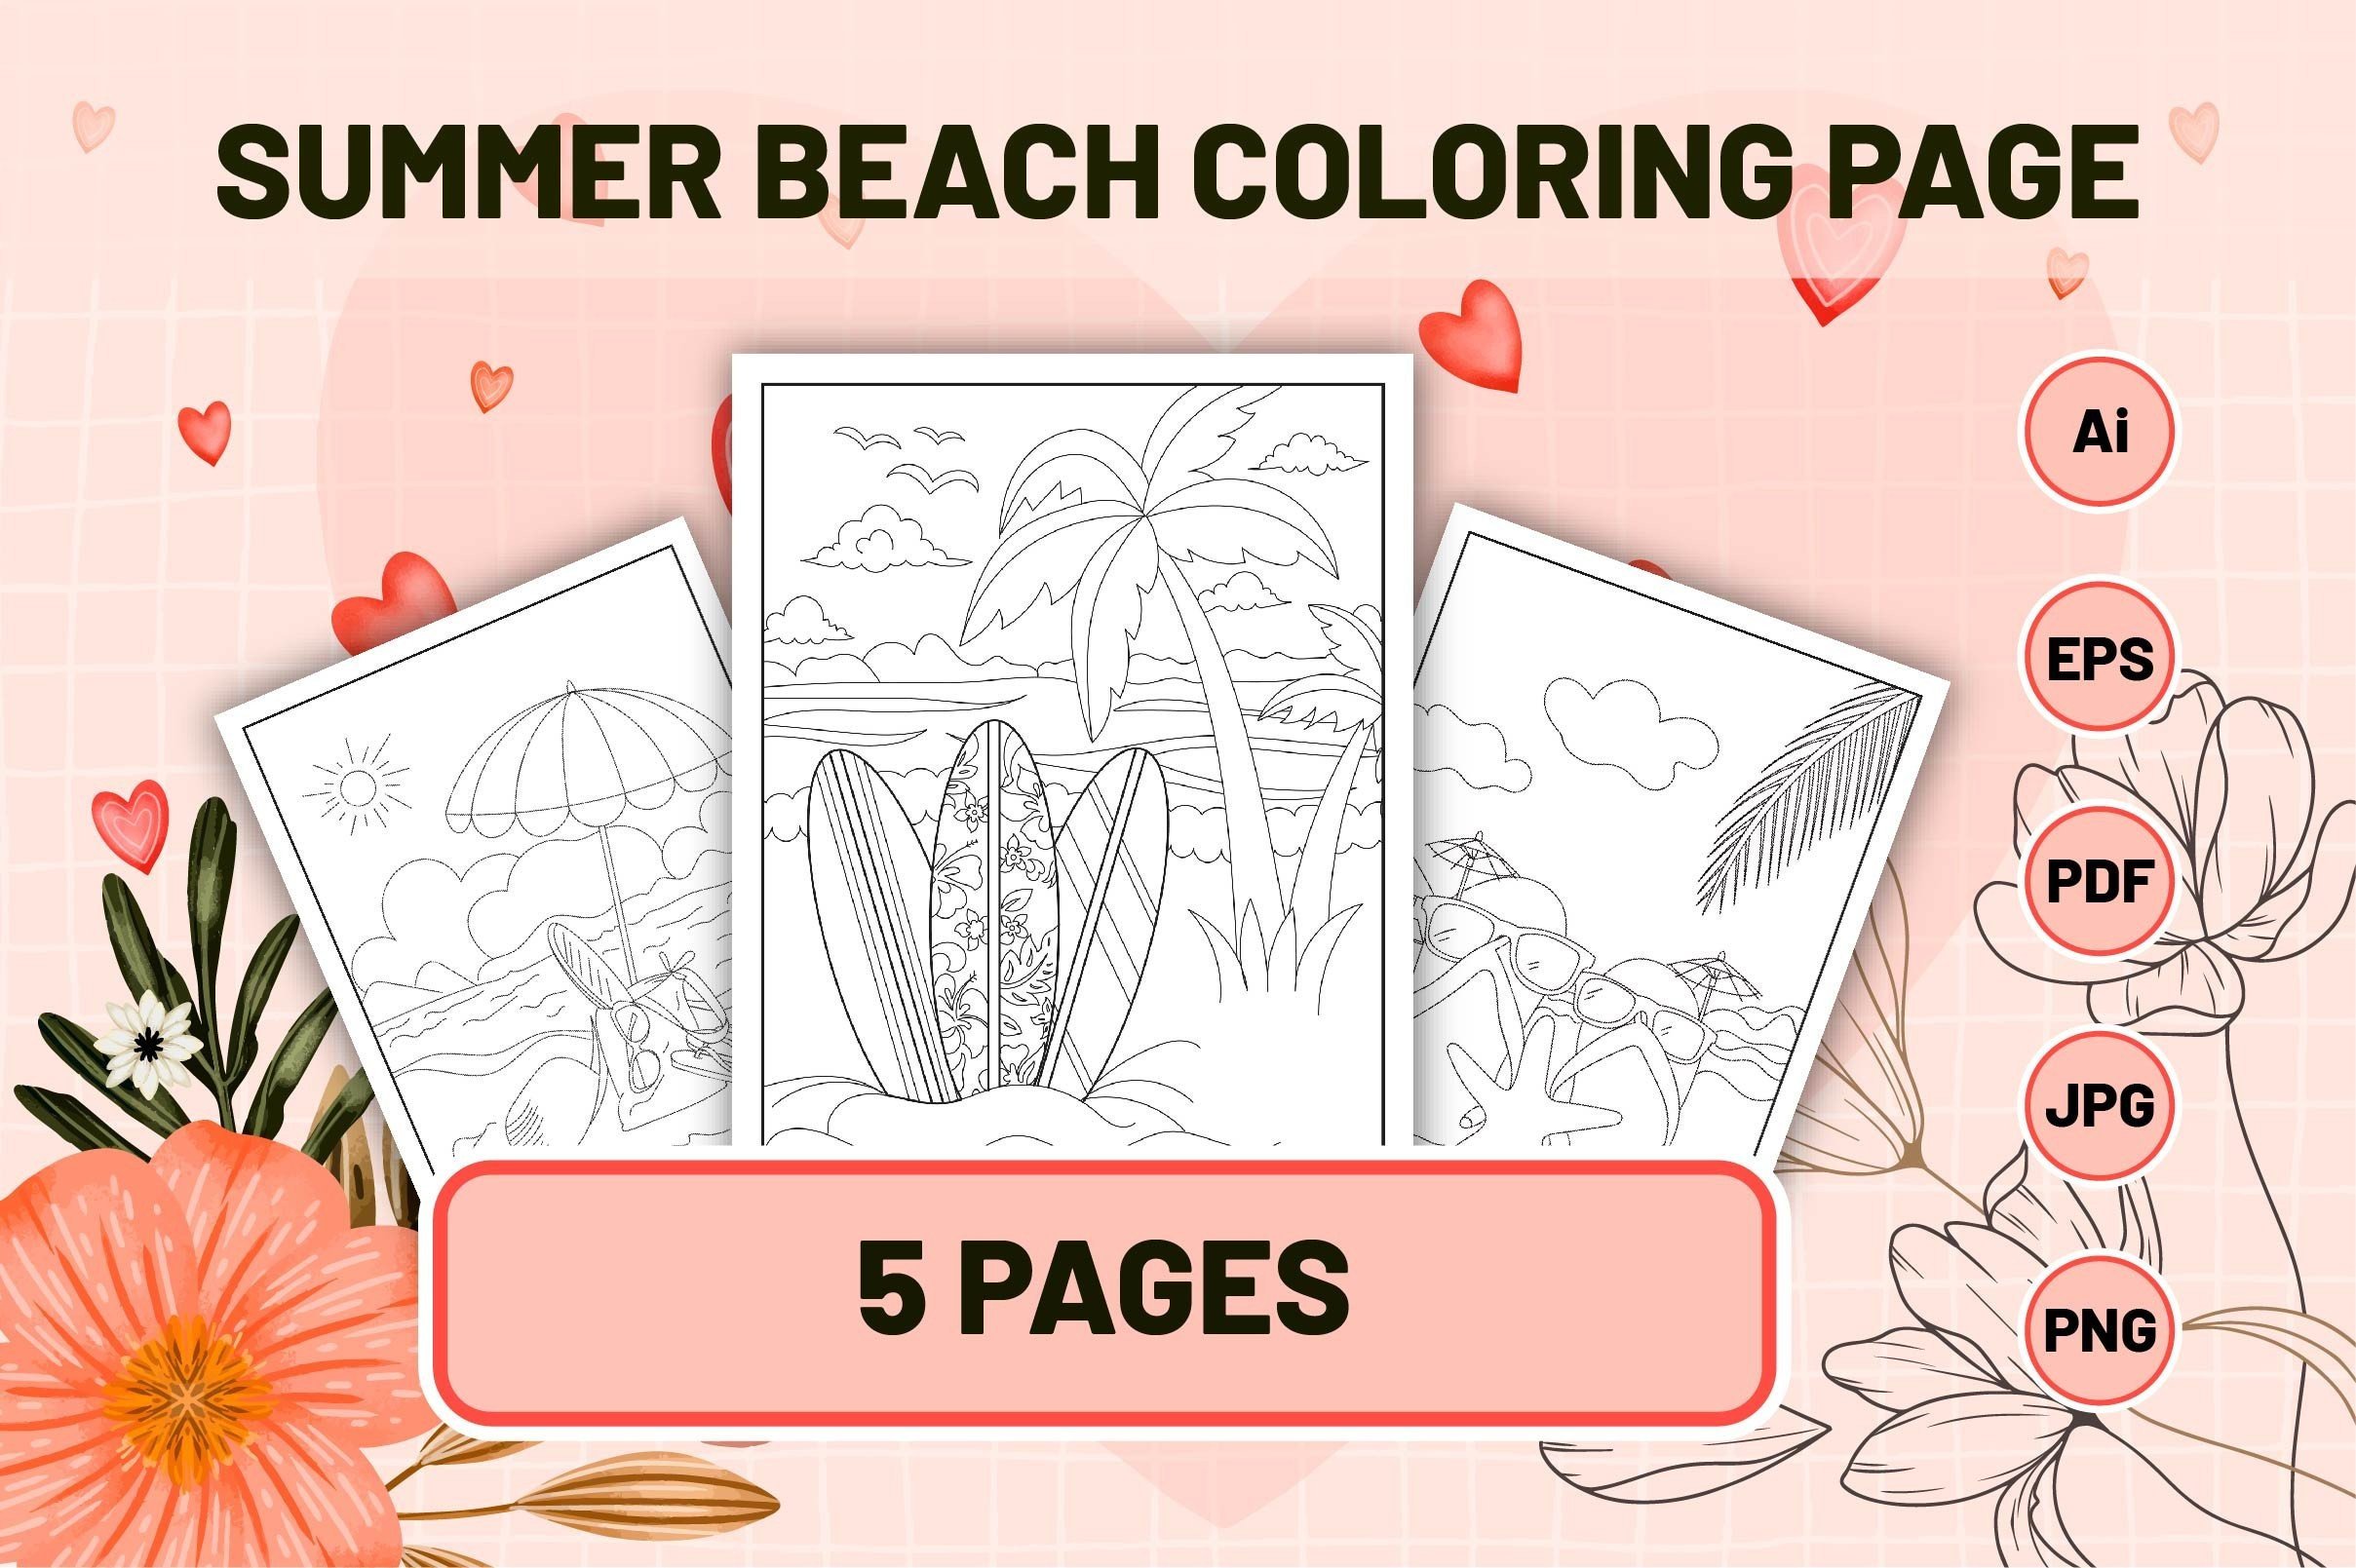 Summer Beach Coloring Pages for Kids Graphic by Tamanna · Creative Fabrica